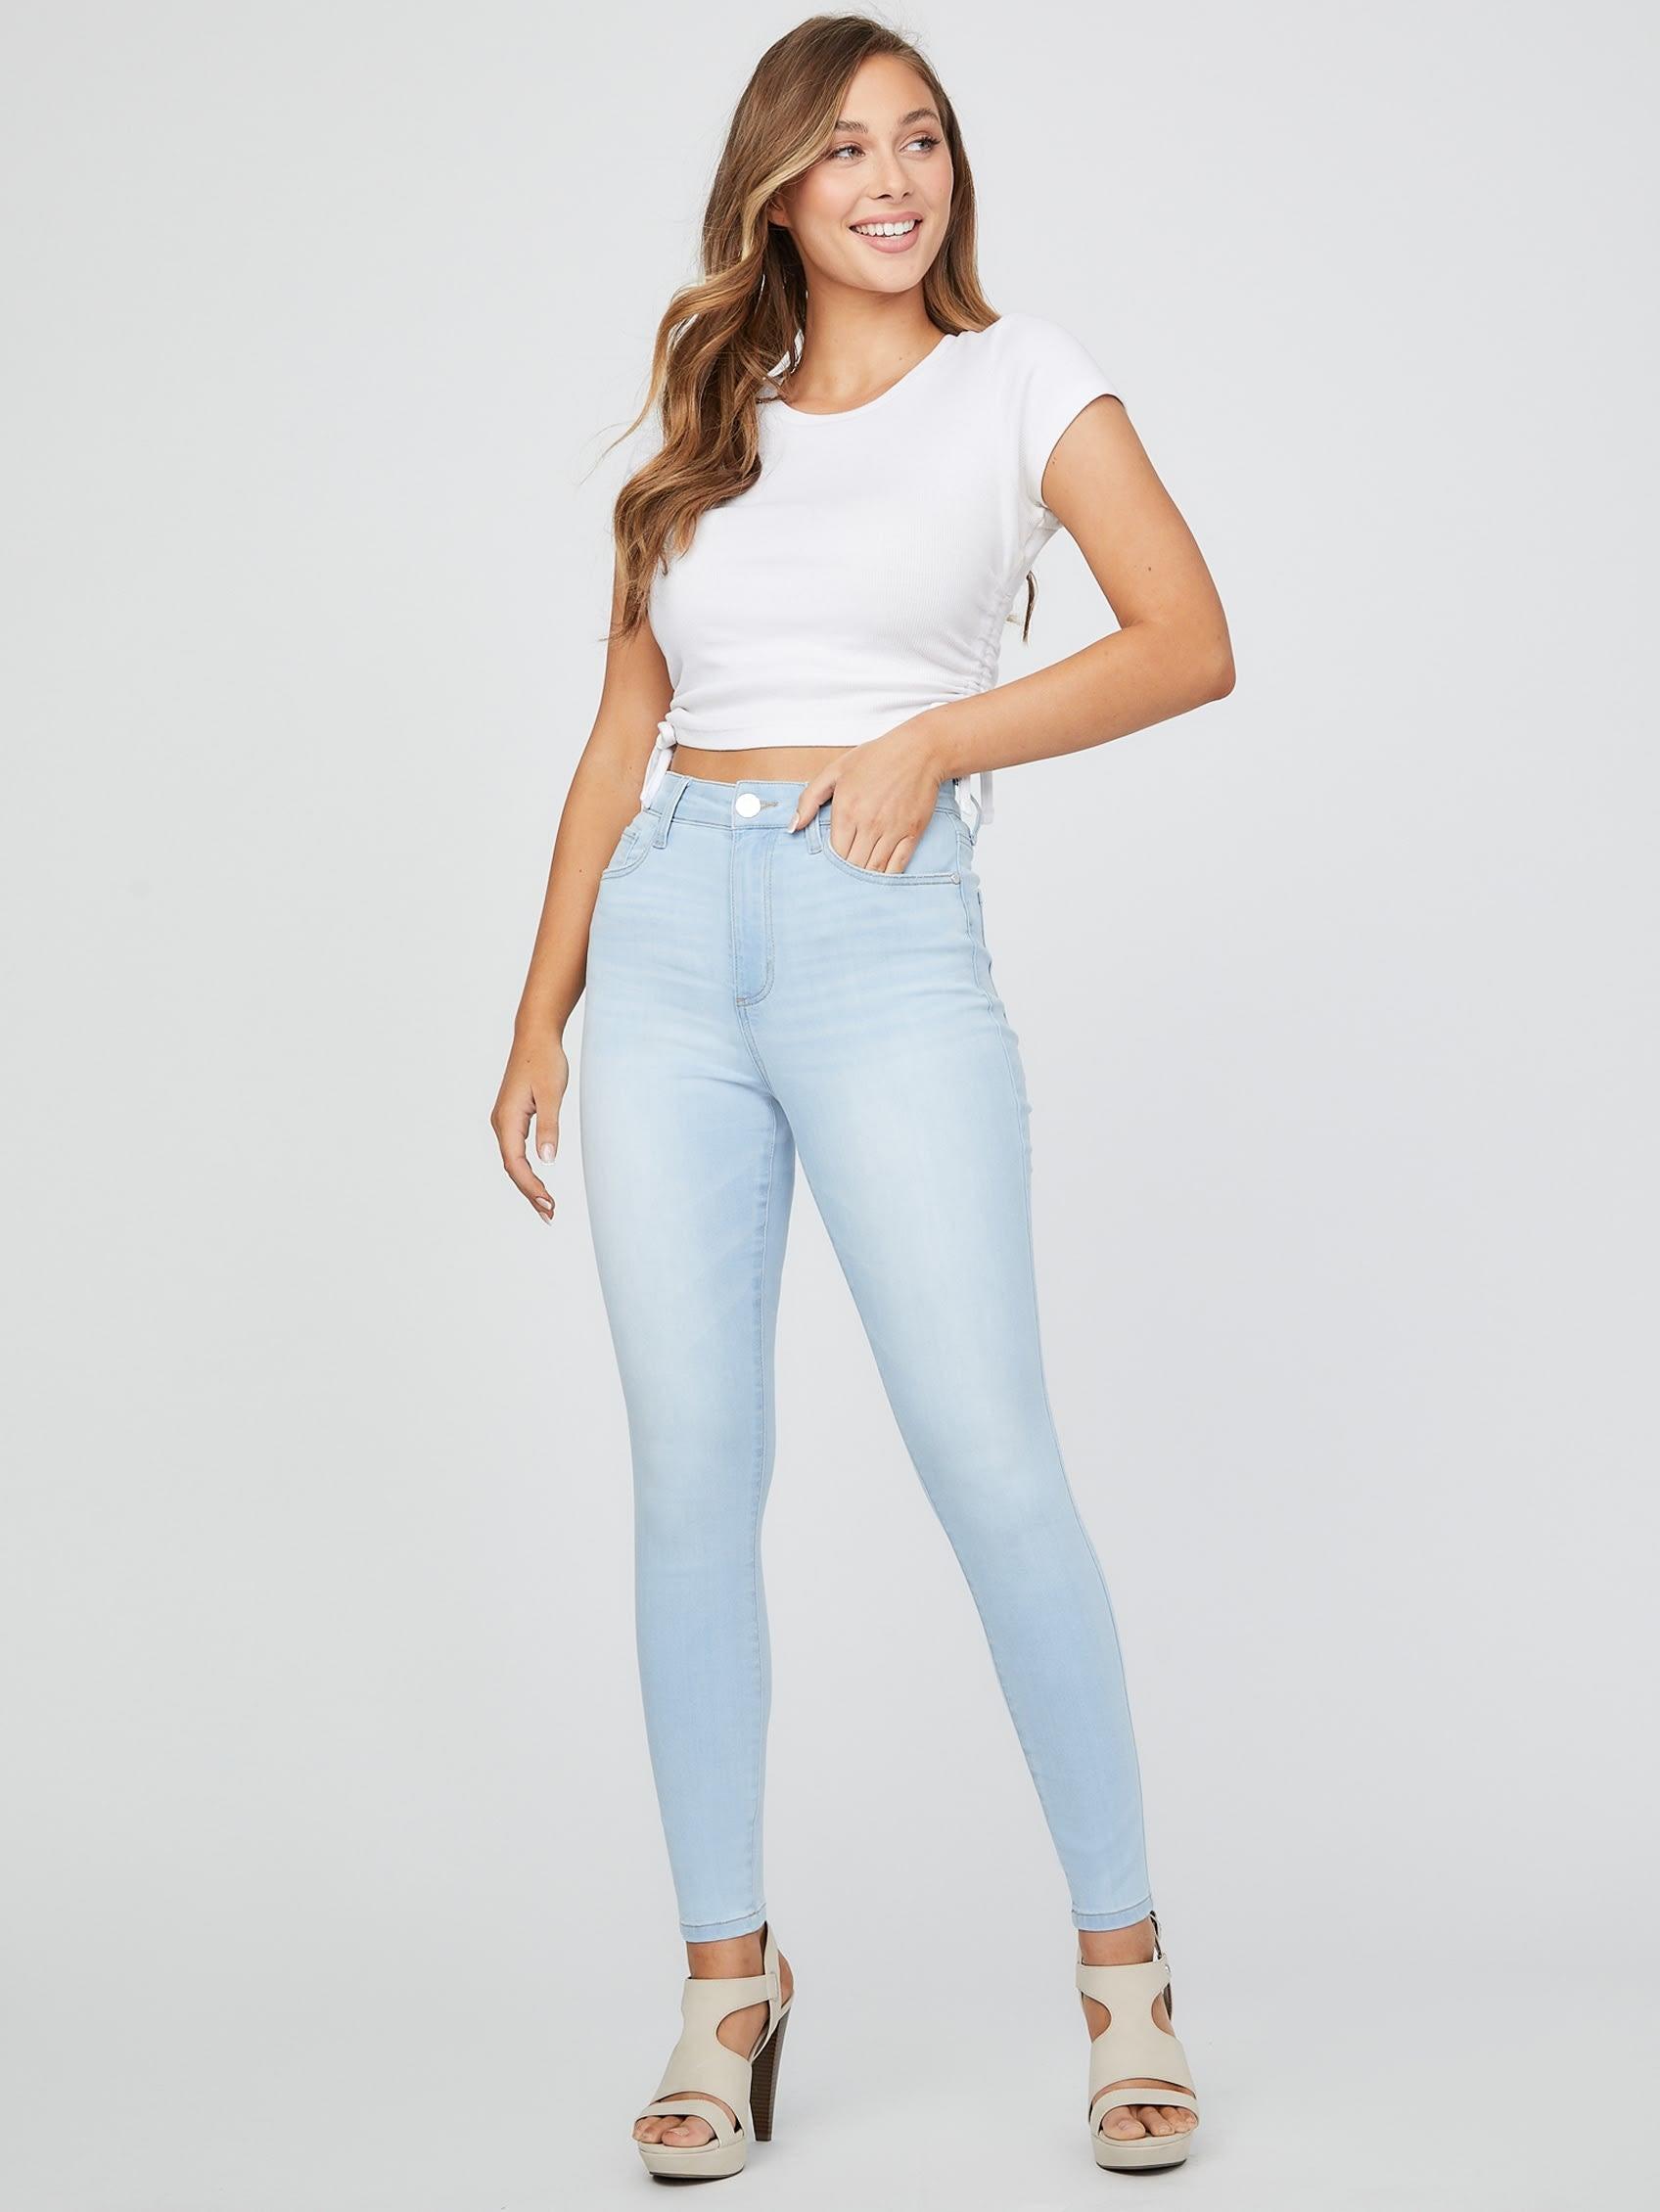 Guess Factory Simmone High-rise Skinny Jeans in Blue | Lyst